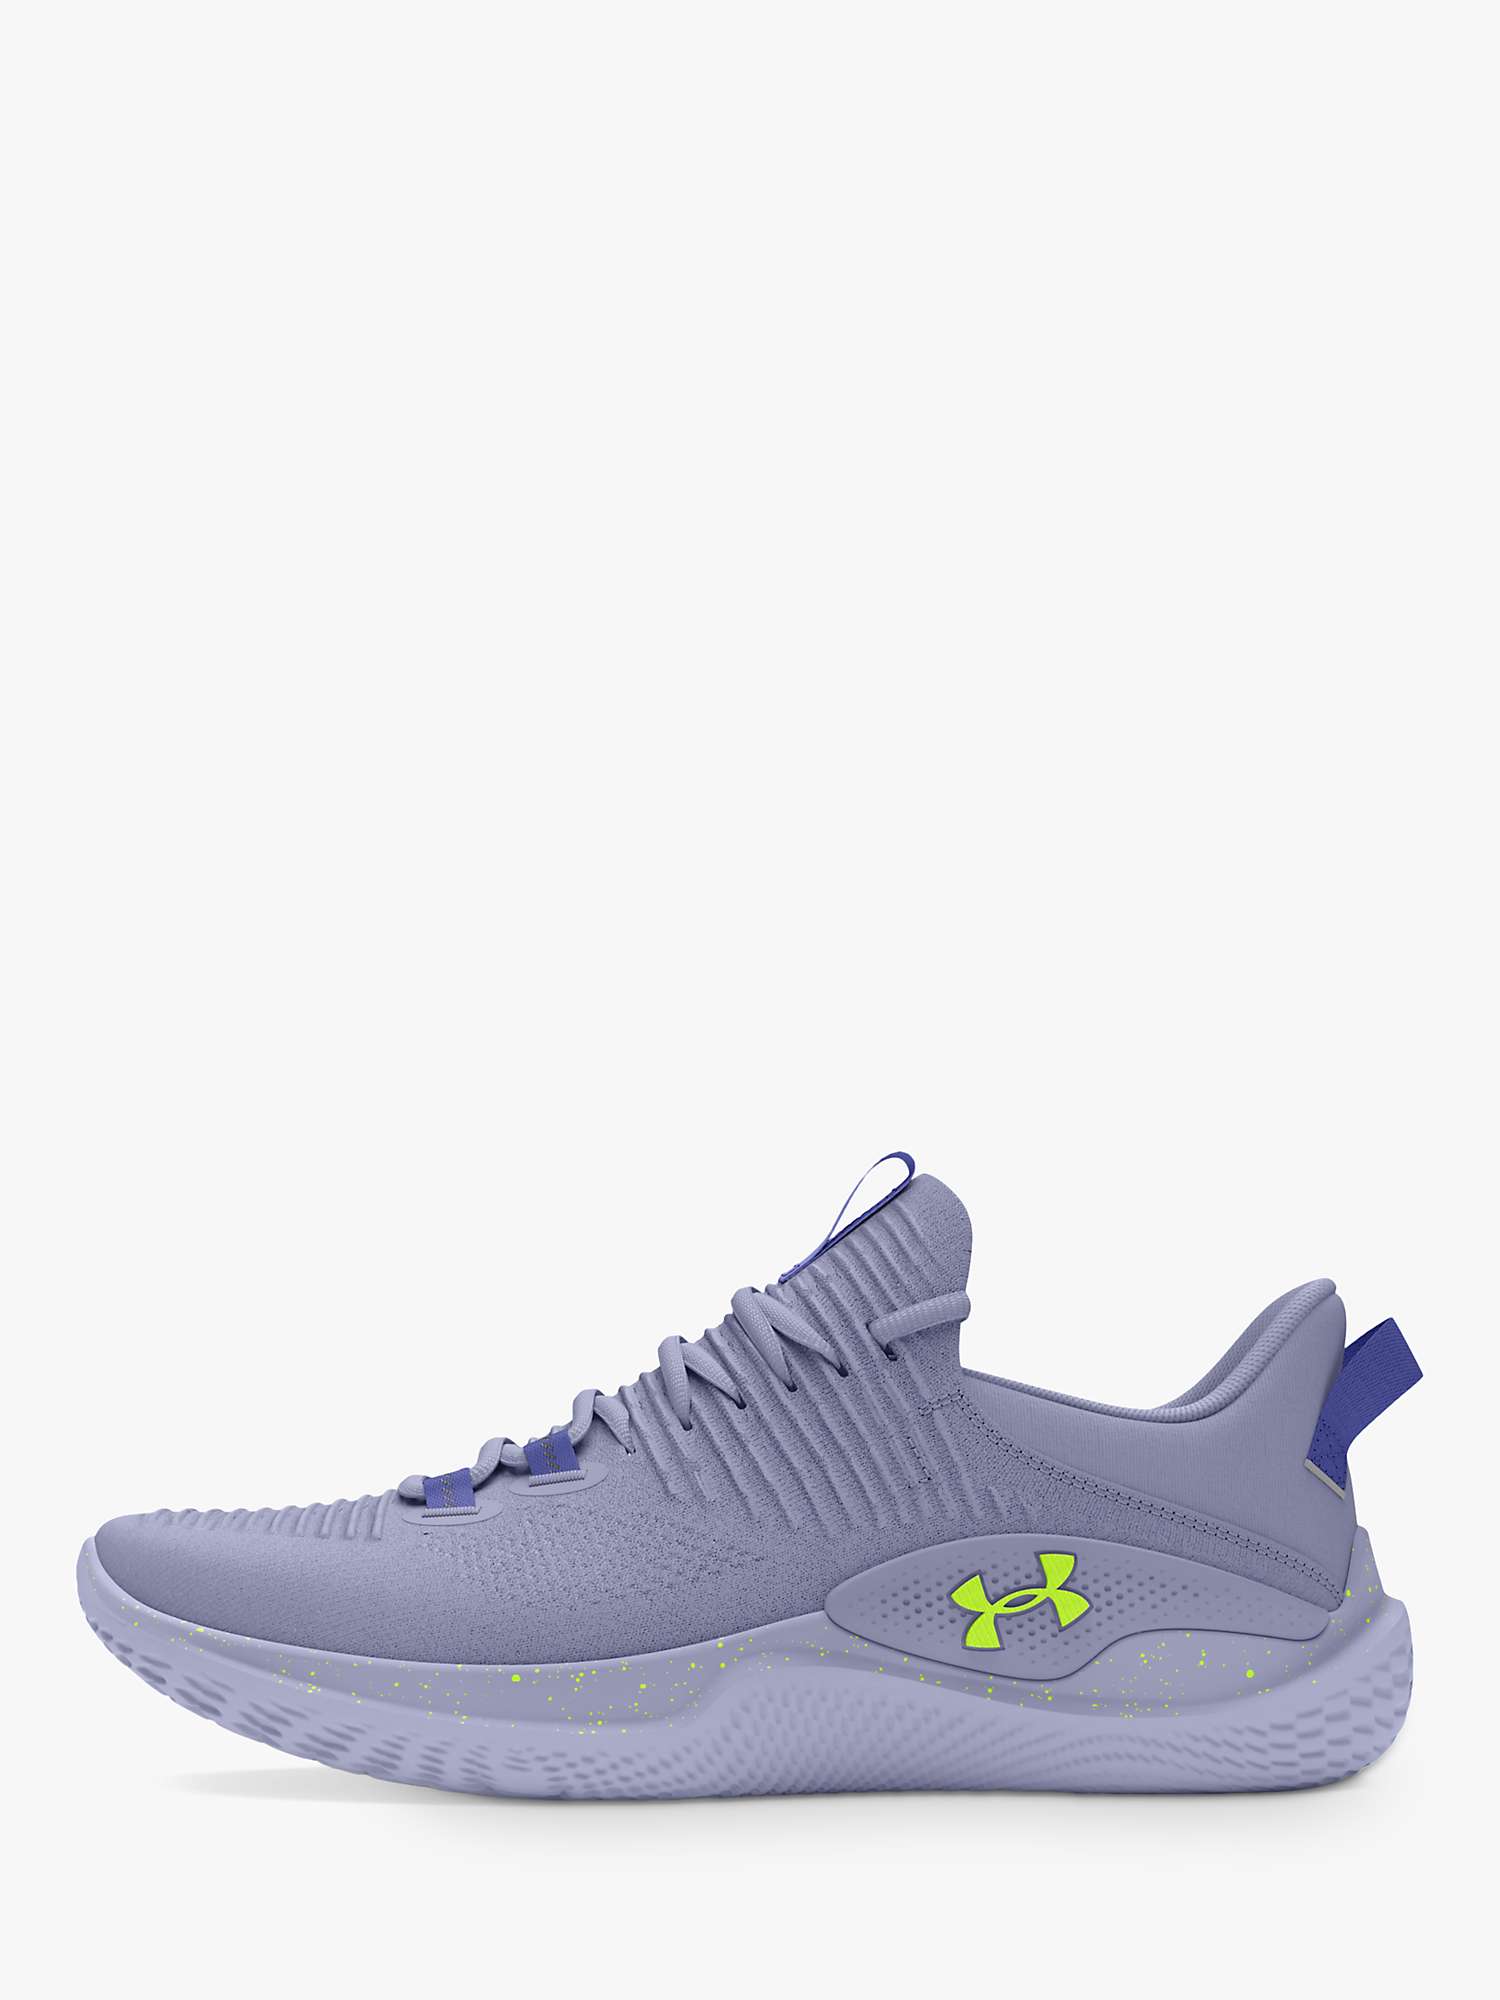 Buy Under Armour Flow Dynamic Women's Training Shoes Online at johnlewis.com